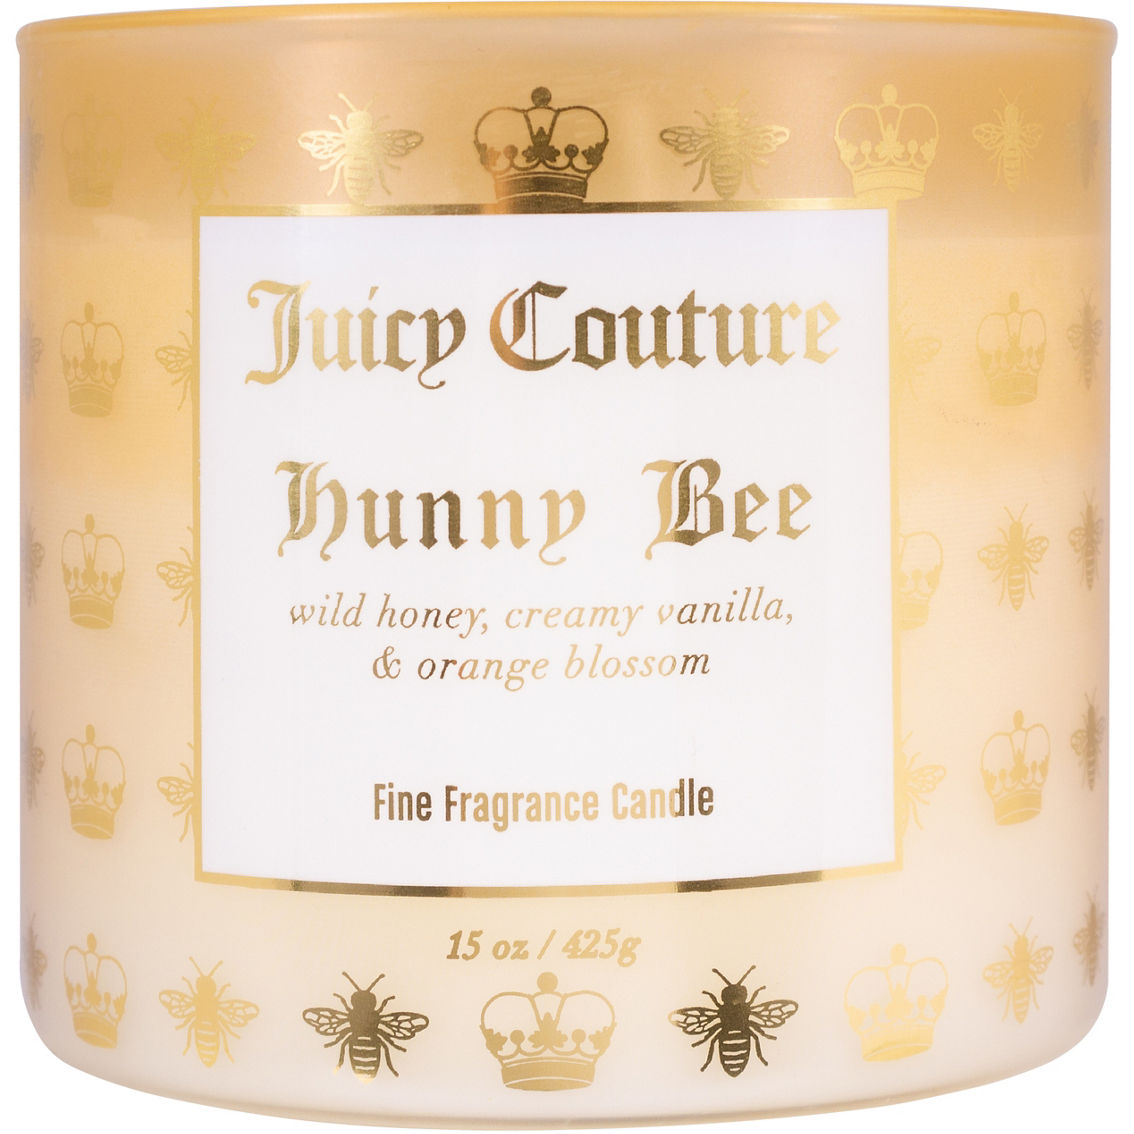 Juicy Couture Hunny Bee 3 Wick Candle - Image 3 of 5